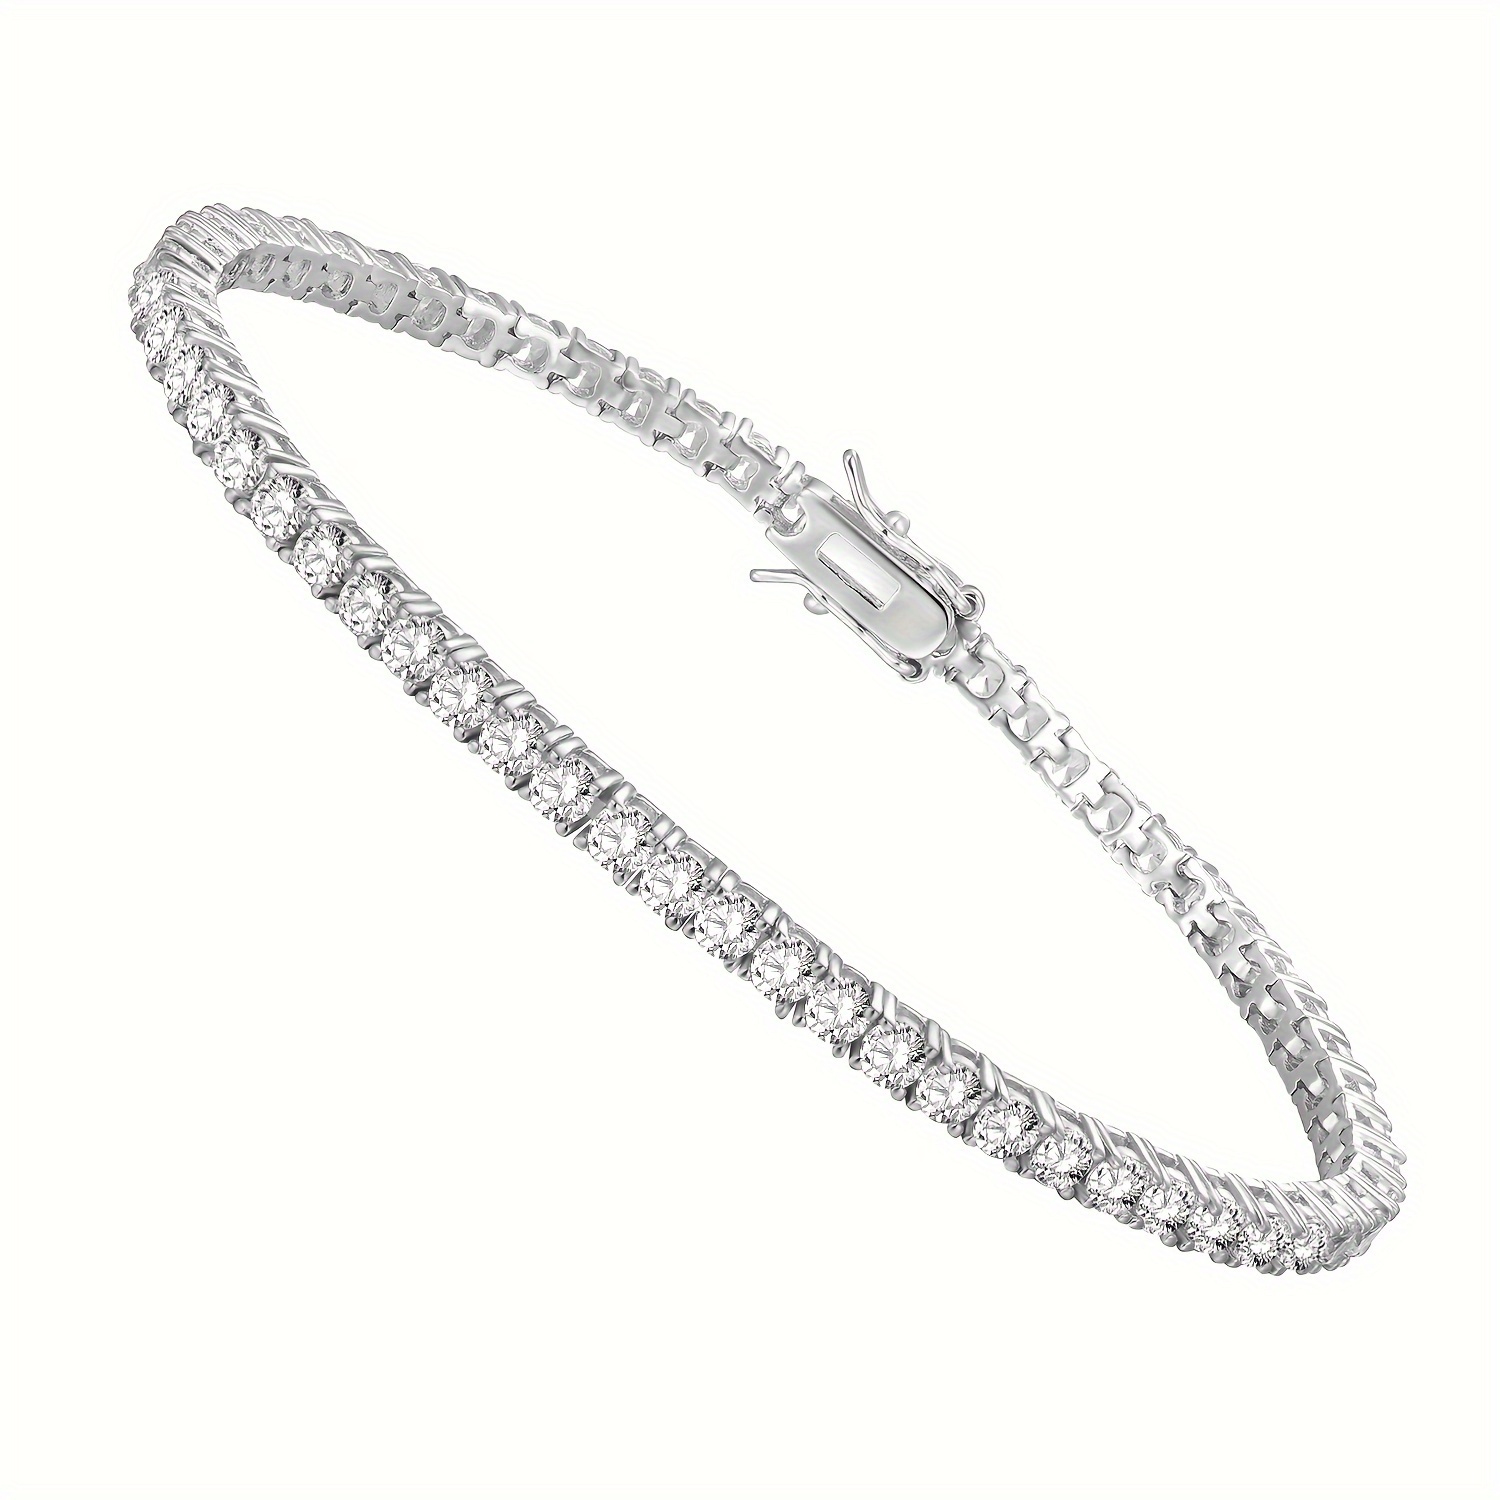 

18k White Gold Plated 4-prong Inlaid 4.0mm White Zircon Classic Tennis Bracelet 6.5-8.5 Inches, Unisex, Holiday Anniversary Gift